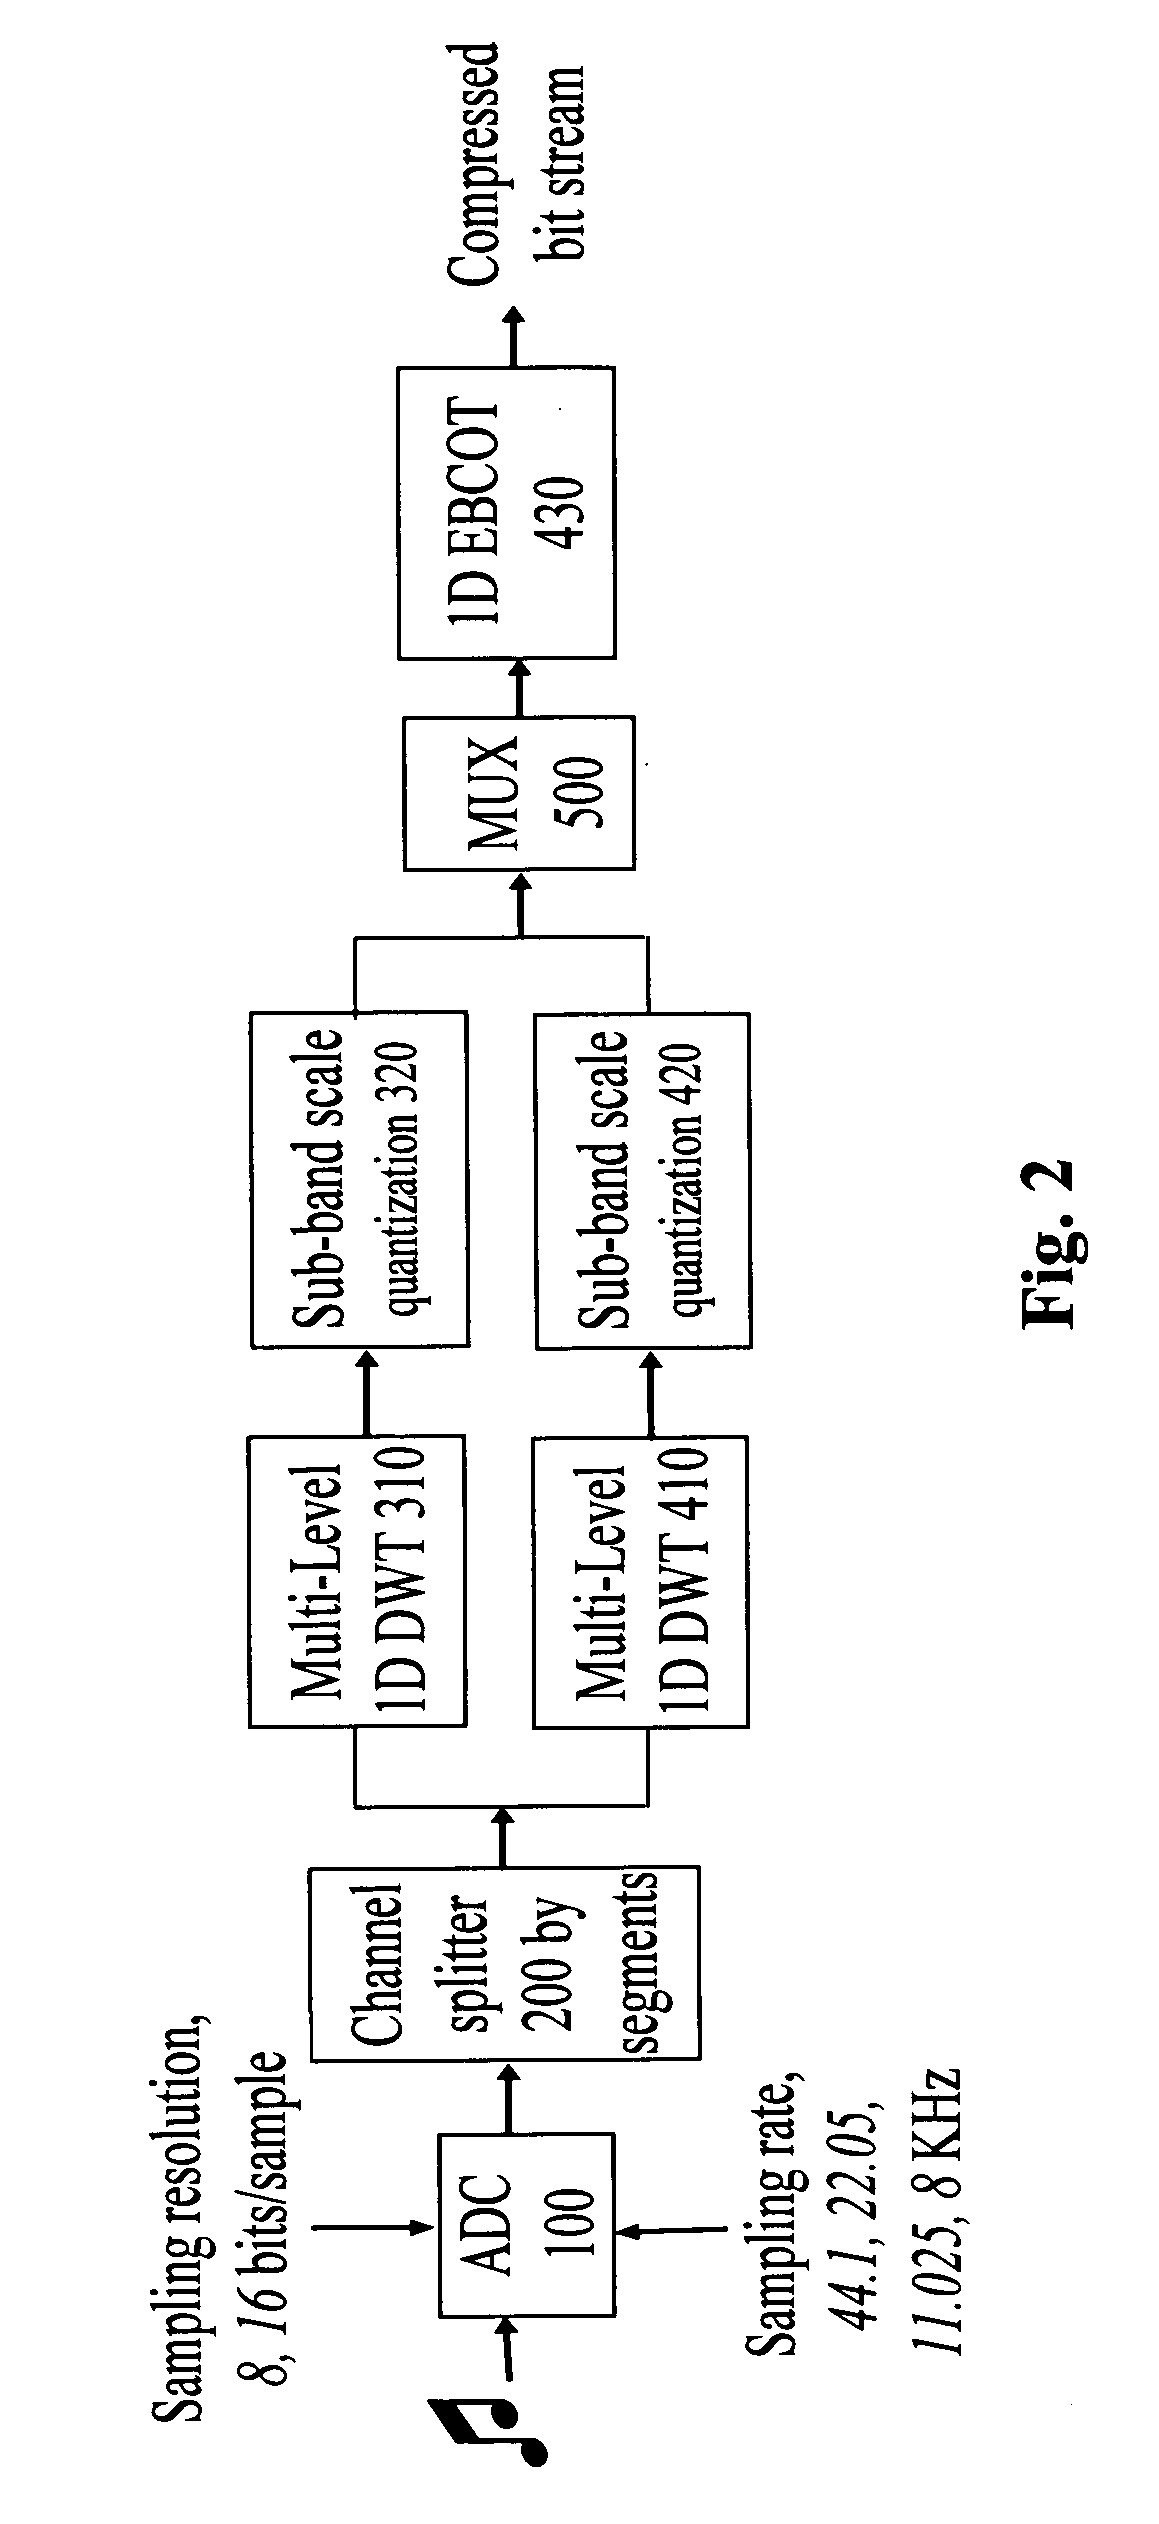 System and method for audio data compression and decompression using discrete wavelet transform (DWT)